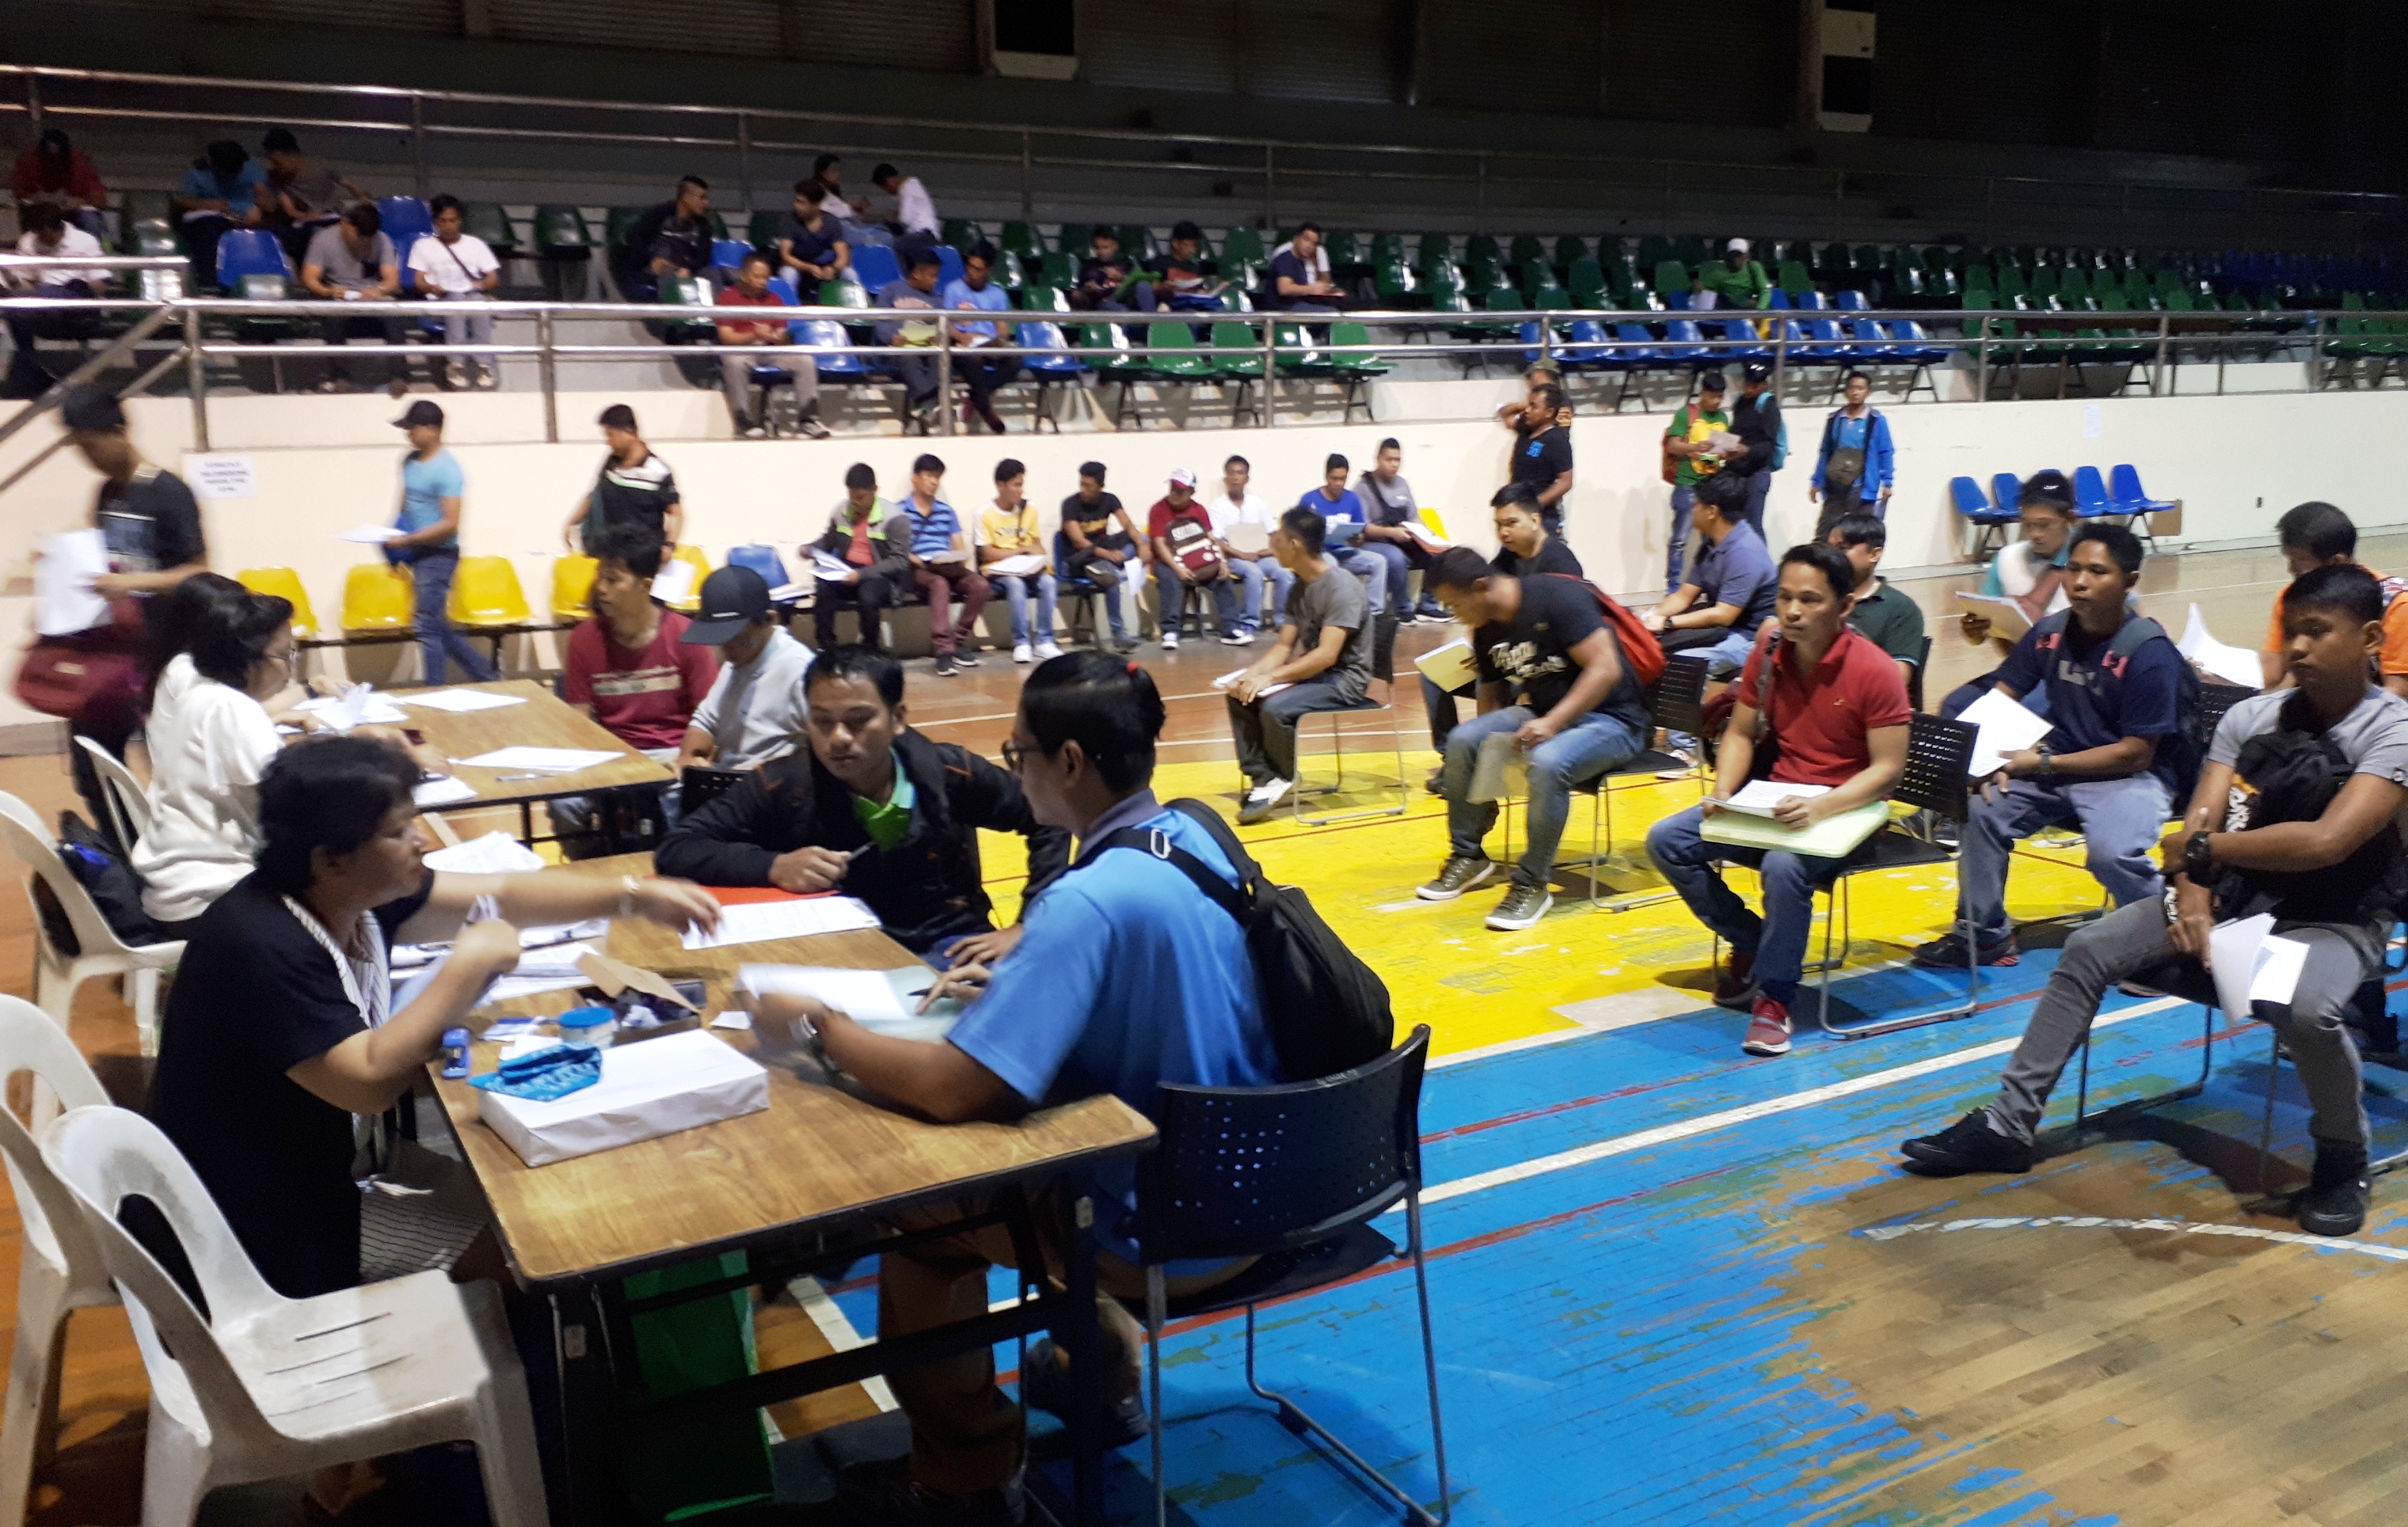 Former Hanjin workers pre-register with the SBMA Labor Department for a jobs fair on February 8 at the Subic Bay Freeport Zone.